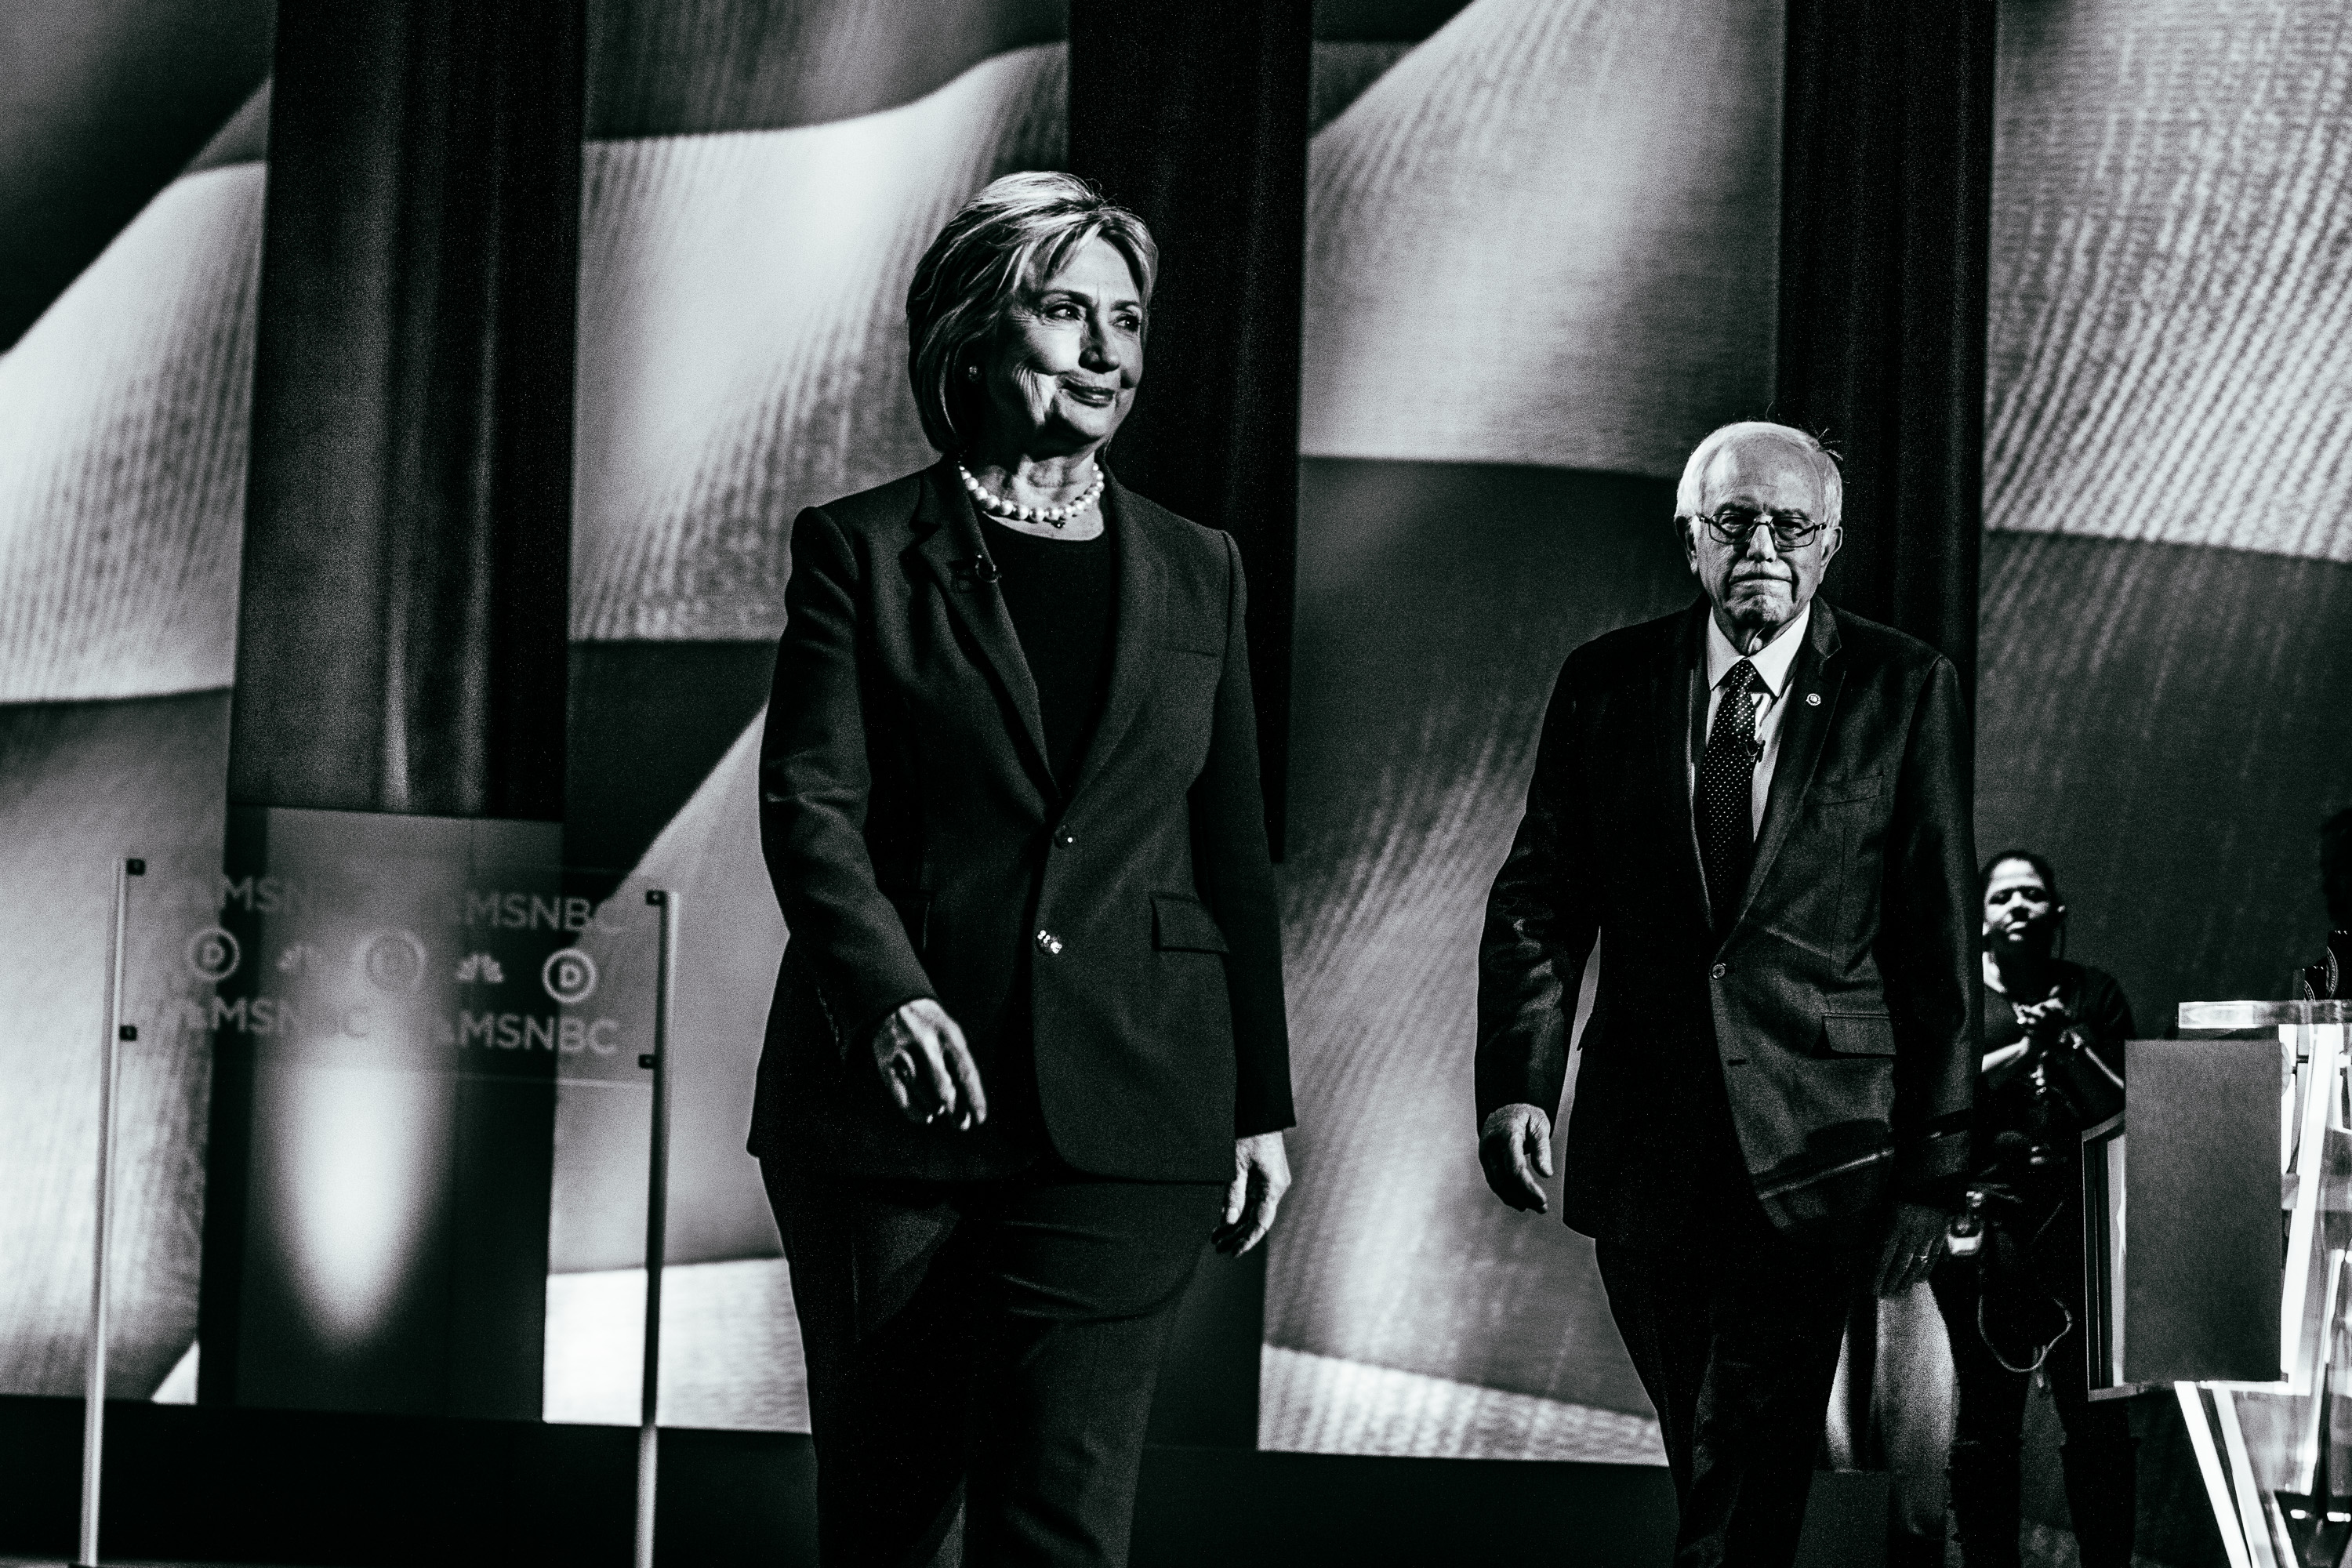 Democratic presidential candidates former Secretary of State Hillary Clinton and U.S. Sen. Bernie Sanders (I-VT) appear at a Democratic debate at the University of New Hampshire on Feb. 4, 2016 in Durham, N.H.